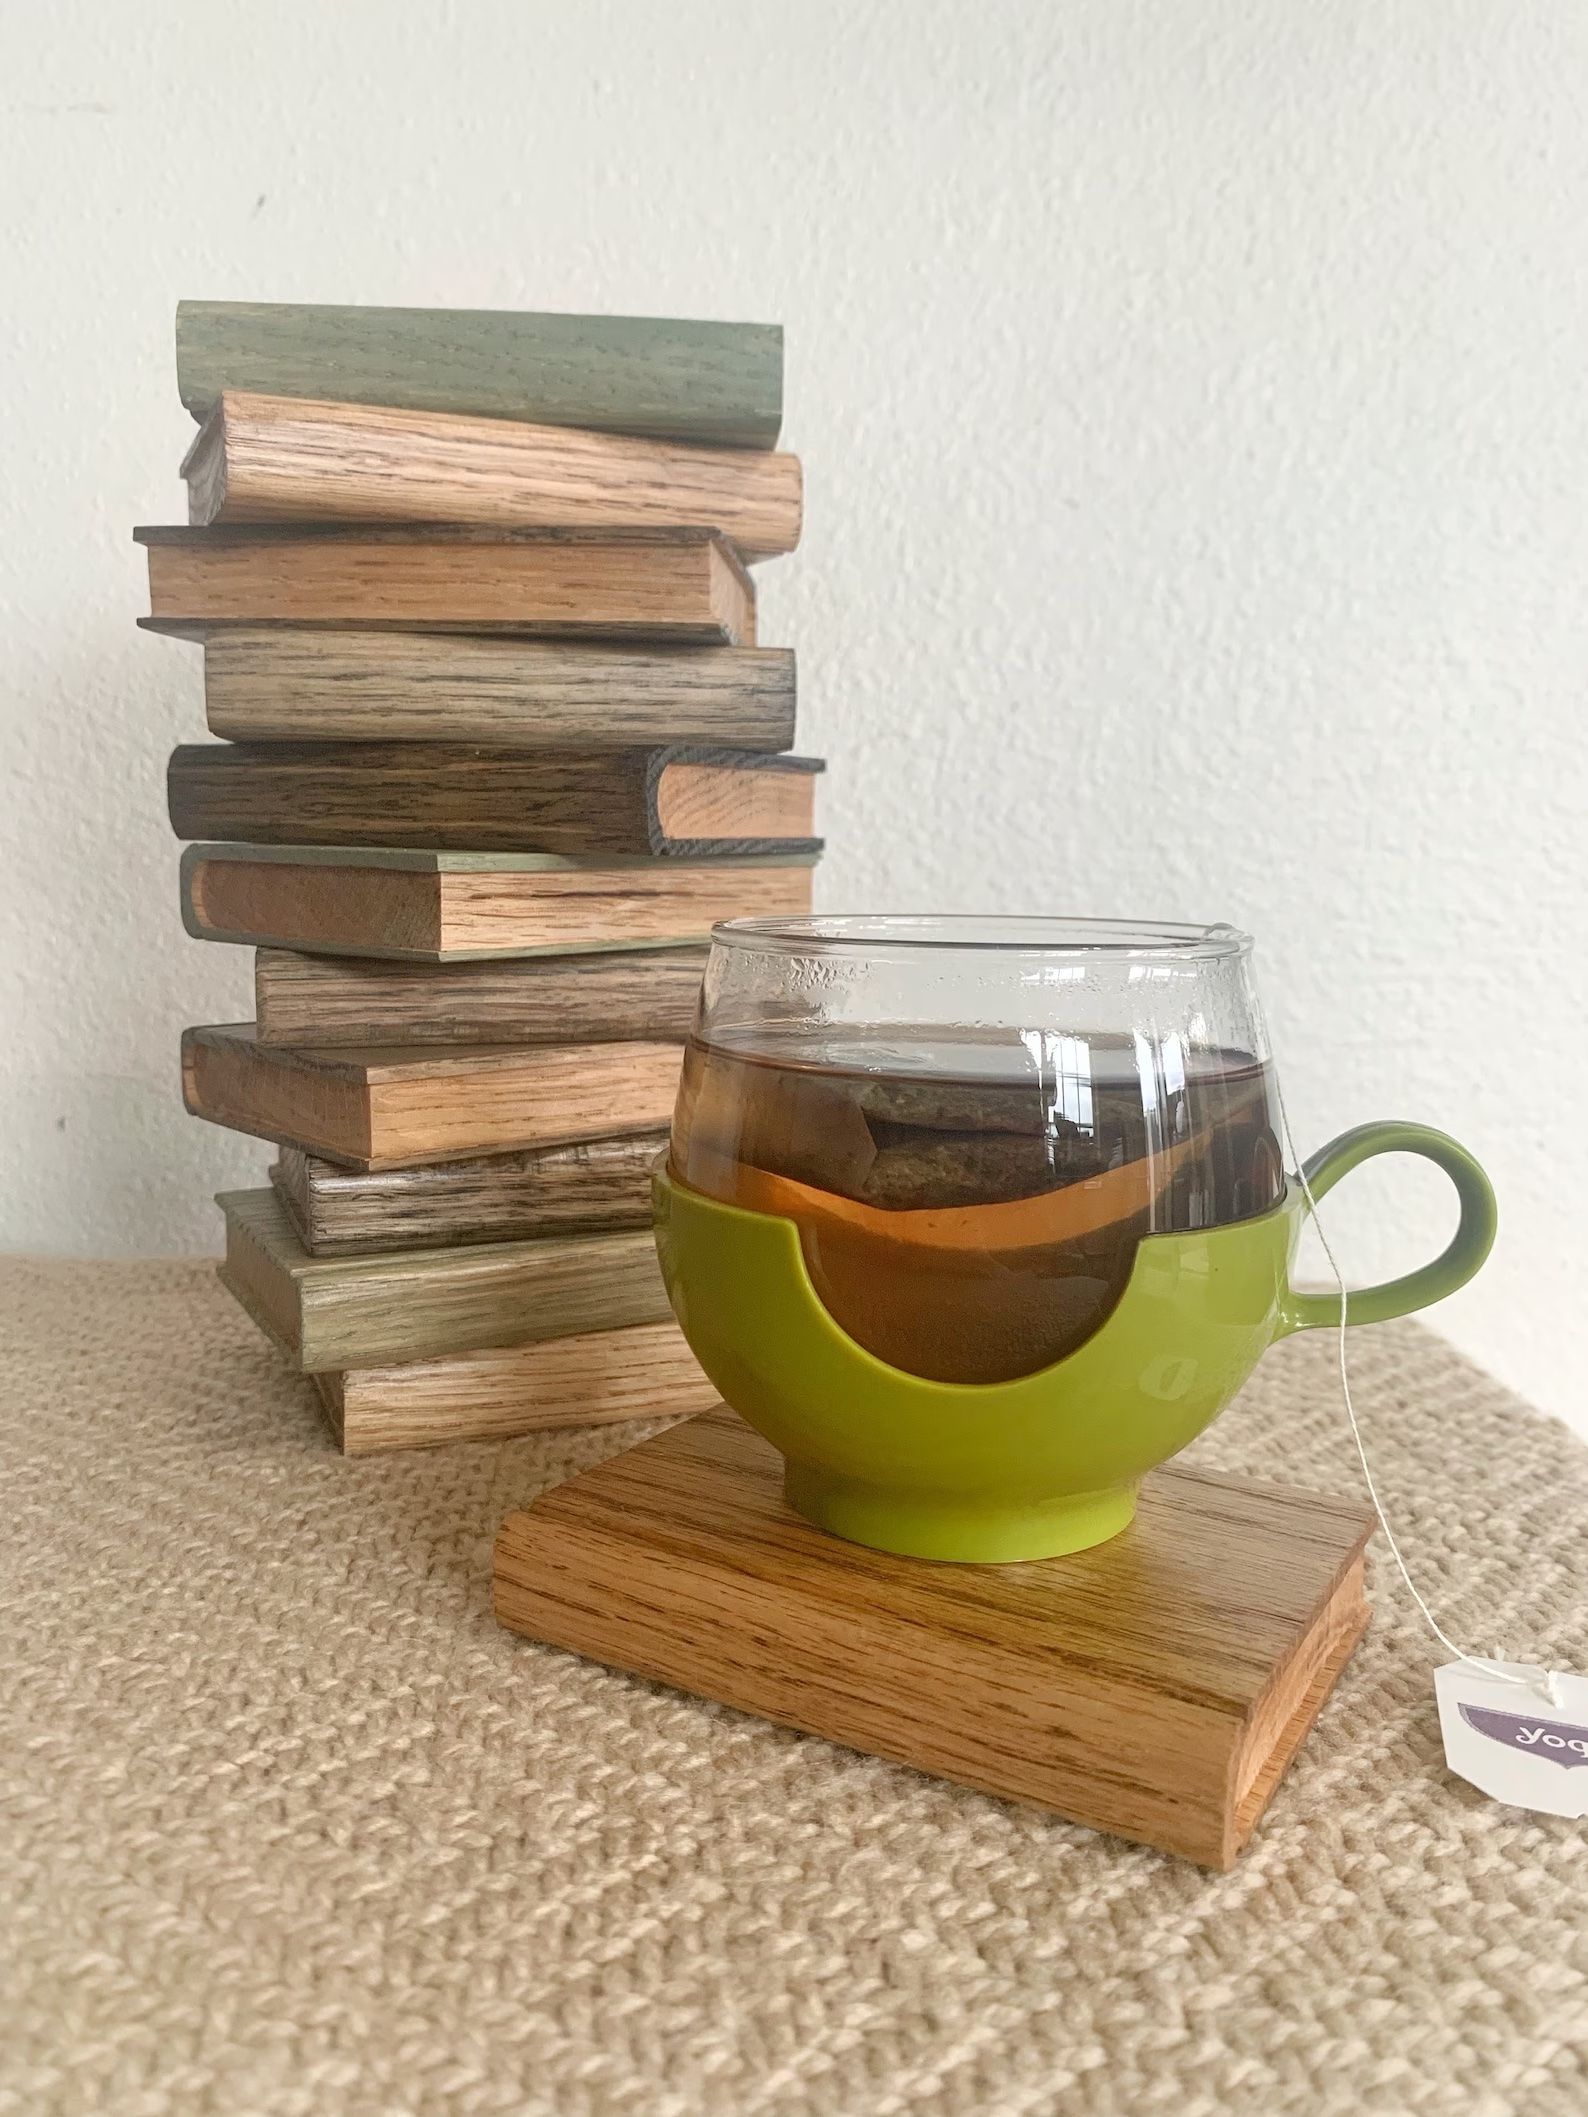 Book shaped wooden coasters in a stack are behind a book shaped wooden coaster with a glass of tea on a table.